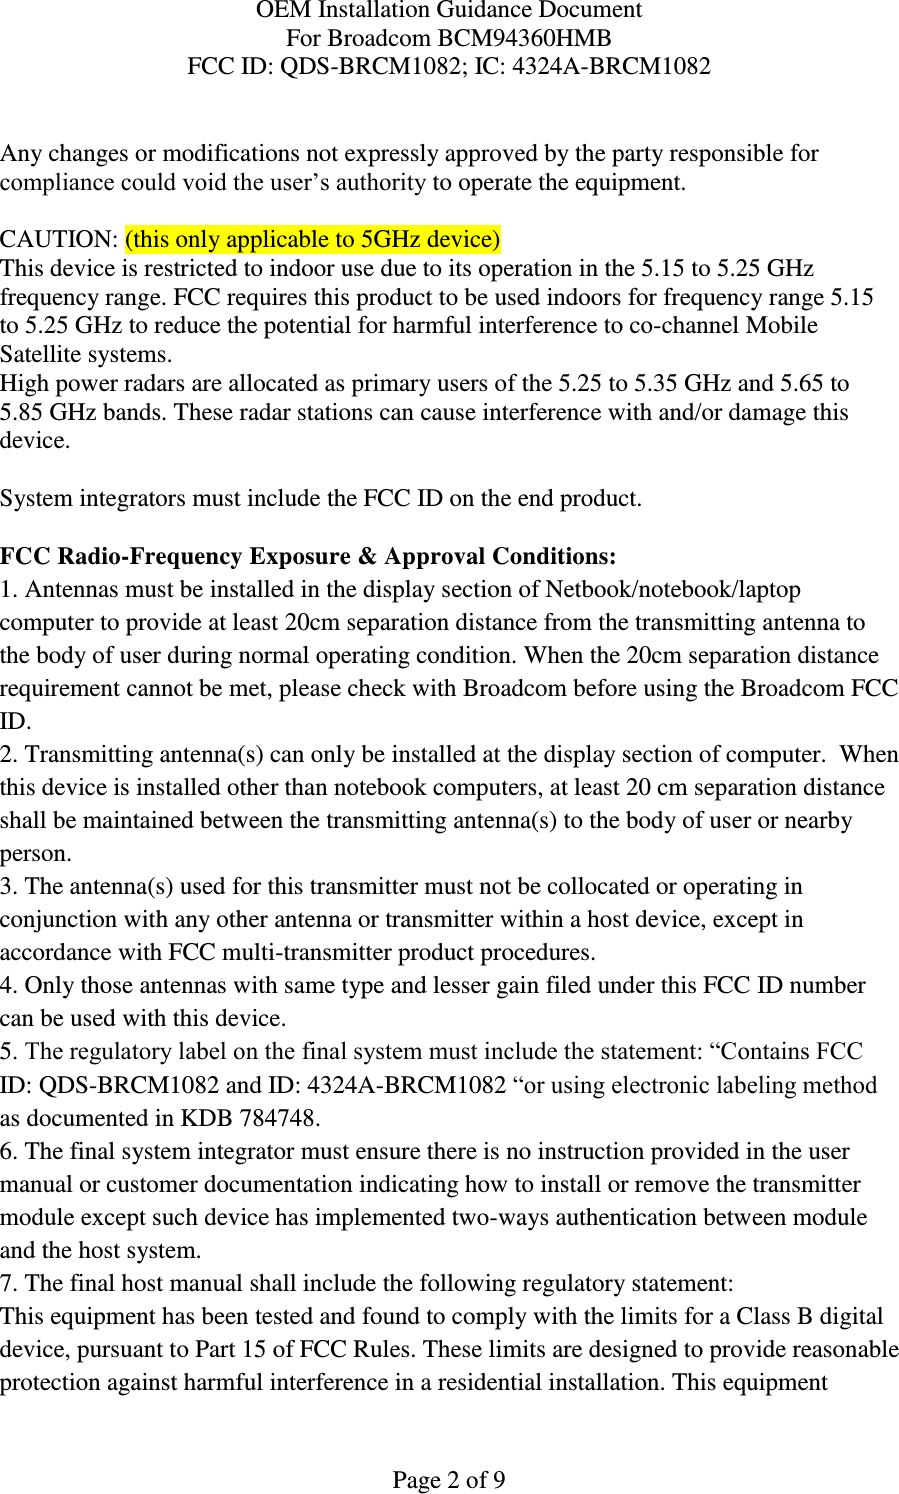 OEM Installation Guidance Document For Broadcom BCM94360HMB FCC ID: QDS-BRCM1082; IC: 4324A-BRCM1082  Page 2 of 9  Any changes or modifications not expressly approved by the party responsible for compliance could void the user’s authority to operate the equipment.  CAUTION: (this only applicable to 5GHz device) This device is restricted to indoor use due to its operation in the 5.15 to 5.25 GHz frequency range. FCC requires this product to be used indoors for frequency range 5.15 to 5.25 GHz to reduce the potential for harmful interference to co-channel Mobile Satellite systems. High power radars are allocated as primary users of the 5.25 to 5.35 GHz and 5.65 to 5.85 GHz bands. These radar stations can cause interference with and/or damage this device.  System integrators must include the FCC ID on the end product.   FCC Radio-Frequency Exposure &amp; Approval Conditions: 1. Antennas must be installed in the display section of Netbook/notebook/laptop computer to provide at least 20cm separation distance from the transmitting antenna to the body of user during normal operating condition. When the 20cm separation distance requirement cannot be met, please check with Broadcom before using the Broadcom FCC ID.  2. Transmitting antenna(s) can only be installed at the display section of computer.  When this device is installed other than notebook computers, at least 20 cm separation distance shall be maintained between the transmitting antenna(s) to the body of user or nearby person. 3. The antenna(s) used for this transmitter must not be collocated or operating in conjunction with any other antenna or transmitter within a host device, except in accordance with FCC multi-transmitter product procedures. 4. Only those antennas with same type and lesser gain filed under this FCC ID number can be used with this device. 5. The regulatory label on the final system must include the statement: “Contains FCC ID: QDS-BRCM1082 and ID: 4324A-BRCM1082 “or using electronic labeling method as documented in KDB 784748. 6. The final system integrator must ensure there is no instruction provided in the user manual or customer documentation indicating how to install or remove the transmitter module except such device has implemented two-ways authentication between module and the host system. 7. The final host manual shall include the following regulatory statement: This equipment has been tested and found to comply with the limits for a Class B digital device, pursuant to Part 15 of FCC Rules. These limits are designed to provide reasonable protection against harmful interference in a residential installation. This equipment 